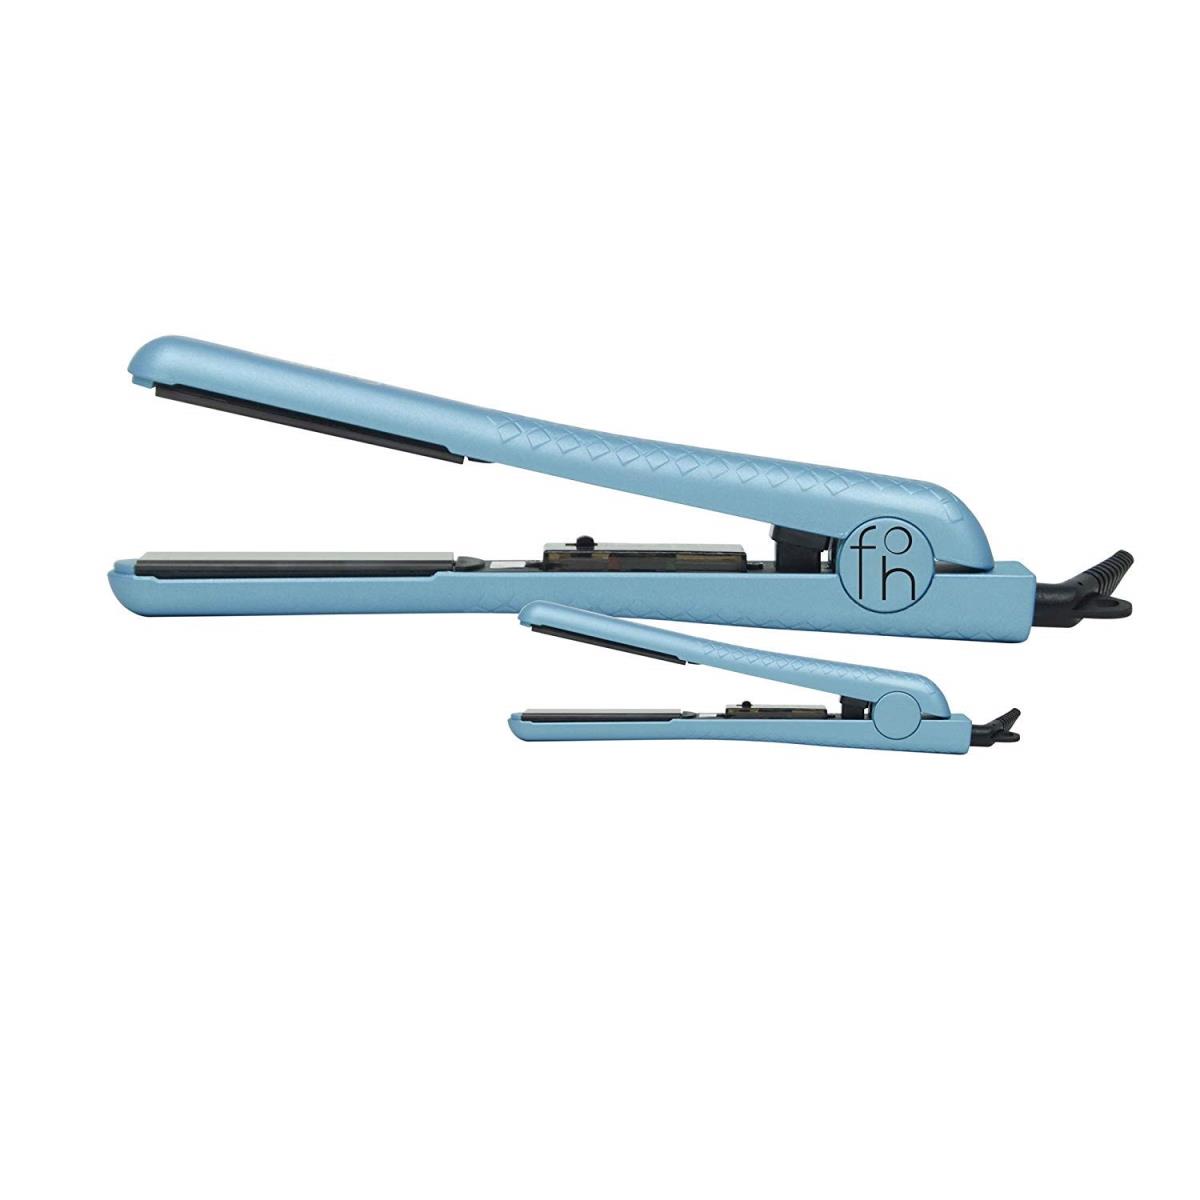 Fht-dt125sb 1.25 & 0.5 In. Heat Wave Collection Travel Size Double Trouble Ceramic Flat Iron Hair Straightener Set, Sky Blue